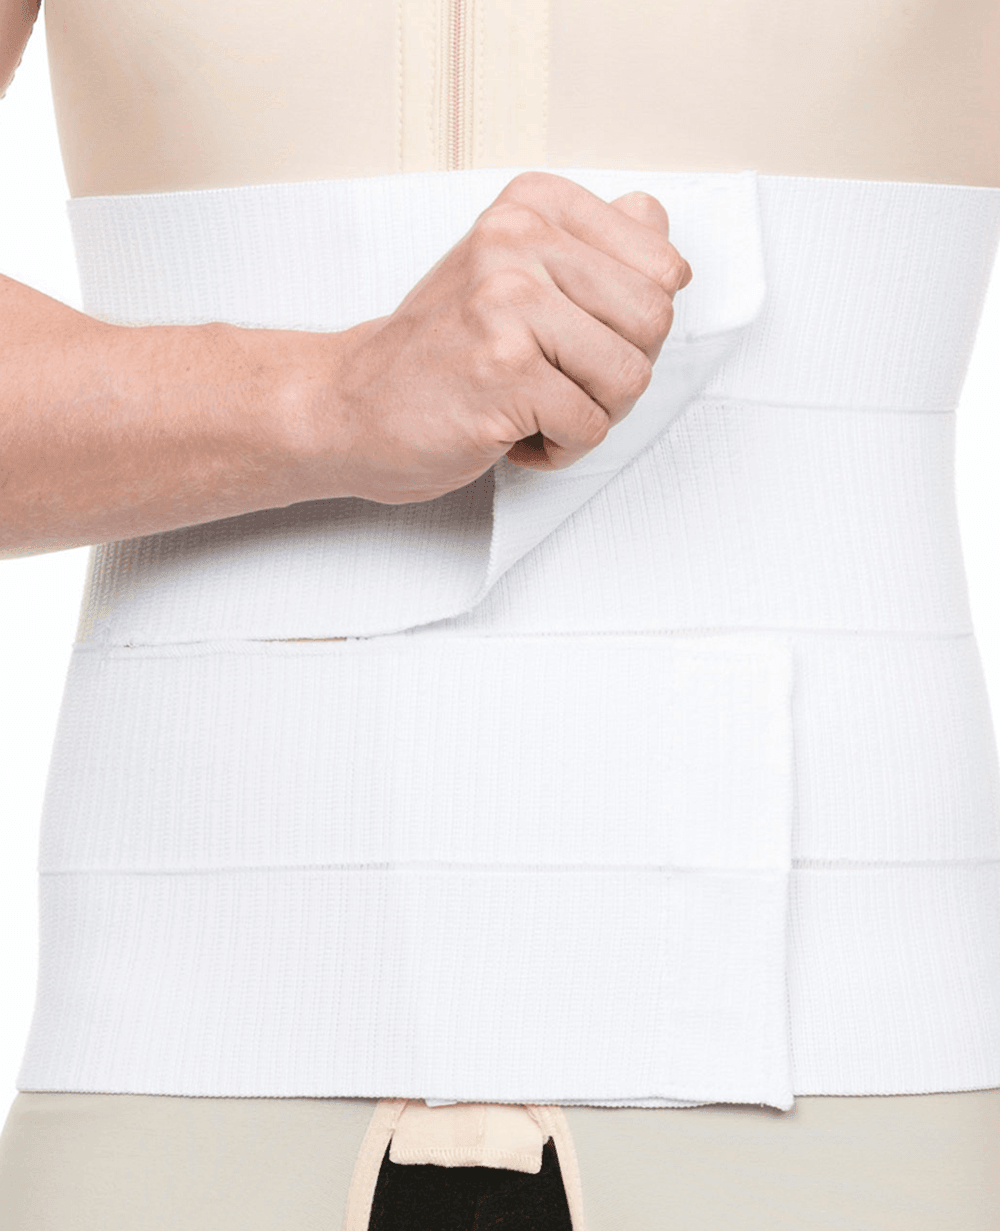 Four Panel Abdominal Binder for Tummy Tuck and Liposuction – Elias